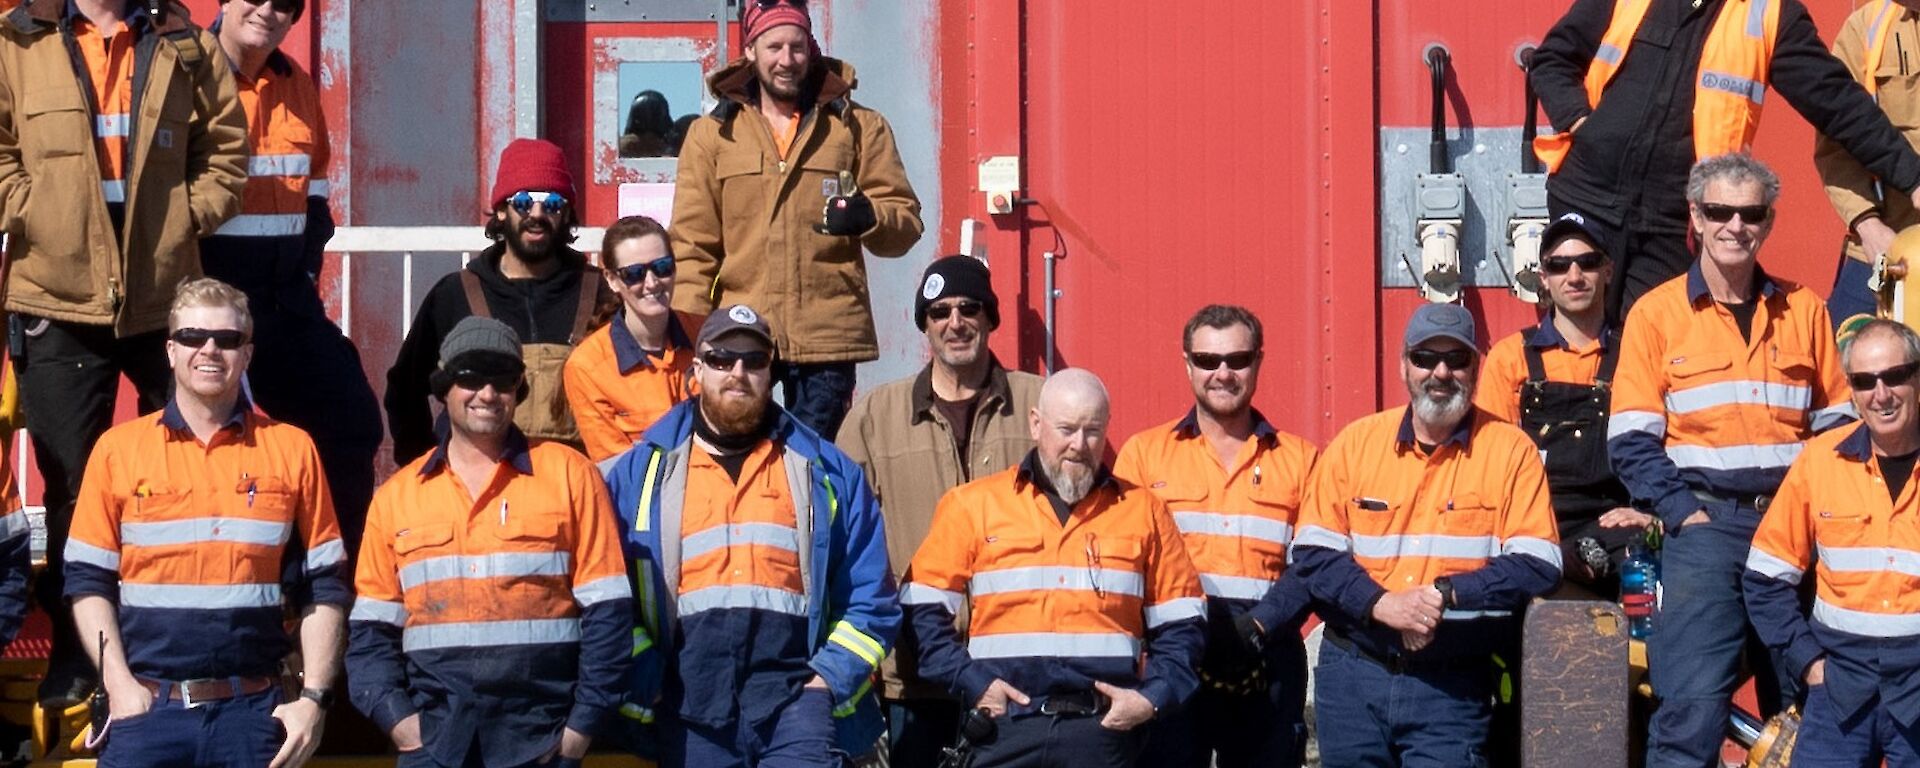 A group of expeditioners standing in front of the red workshop building all dressed in High vis work clothing.